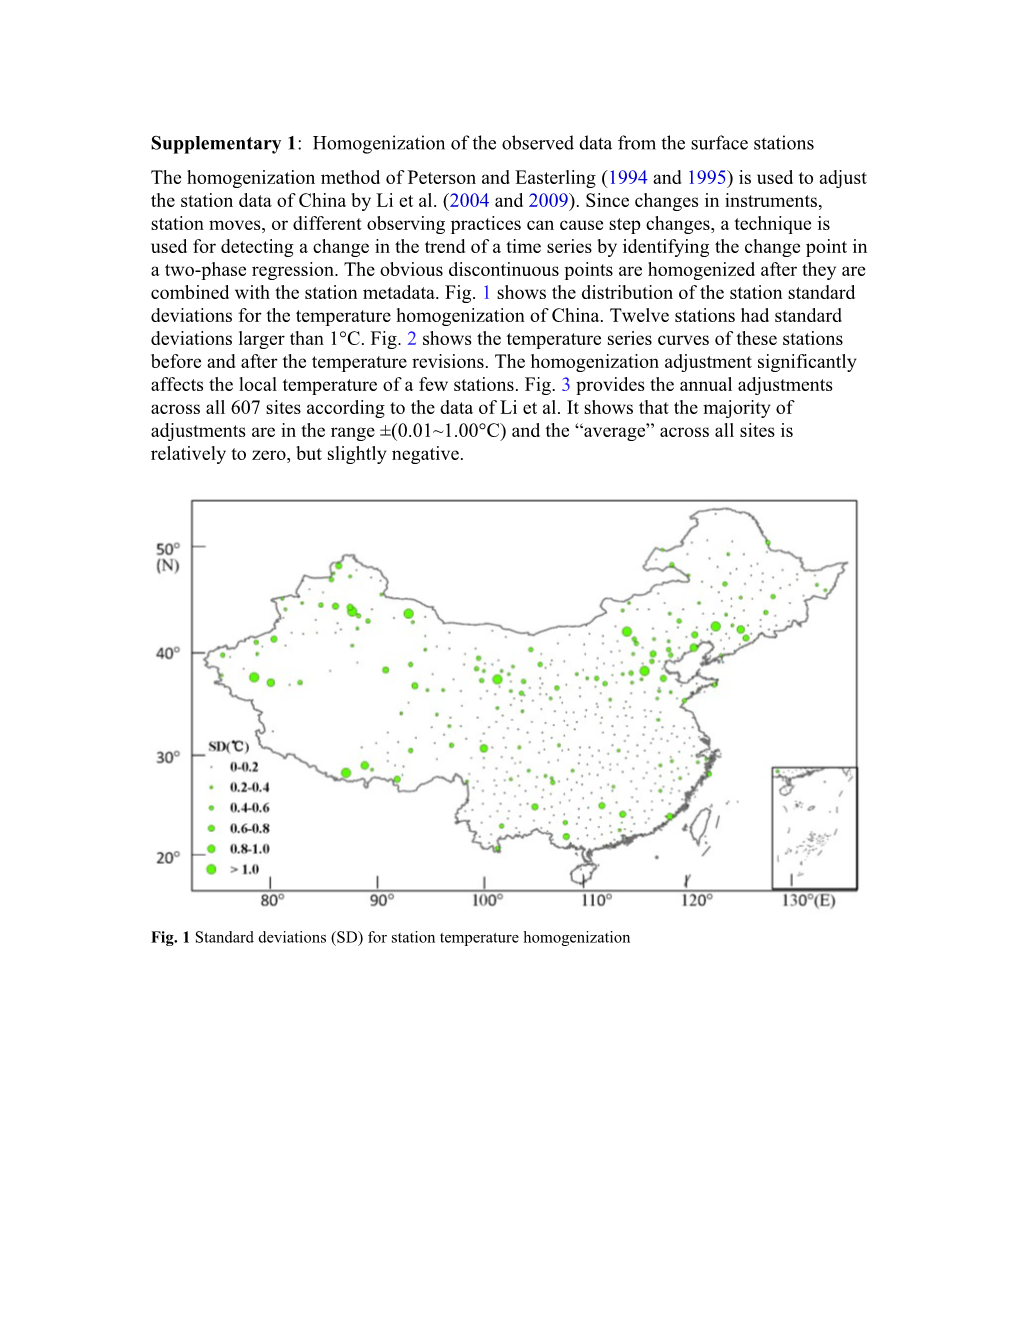 New Evidence on Temperature Variations and Trends Over China from 1951-2010 Based on Satellite